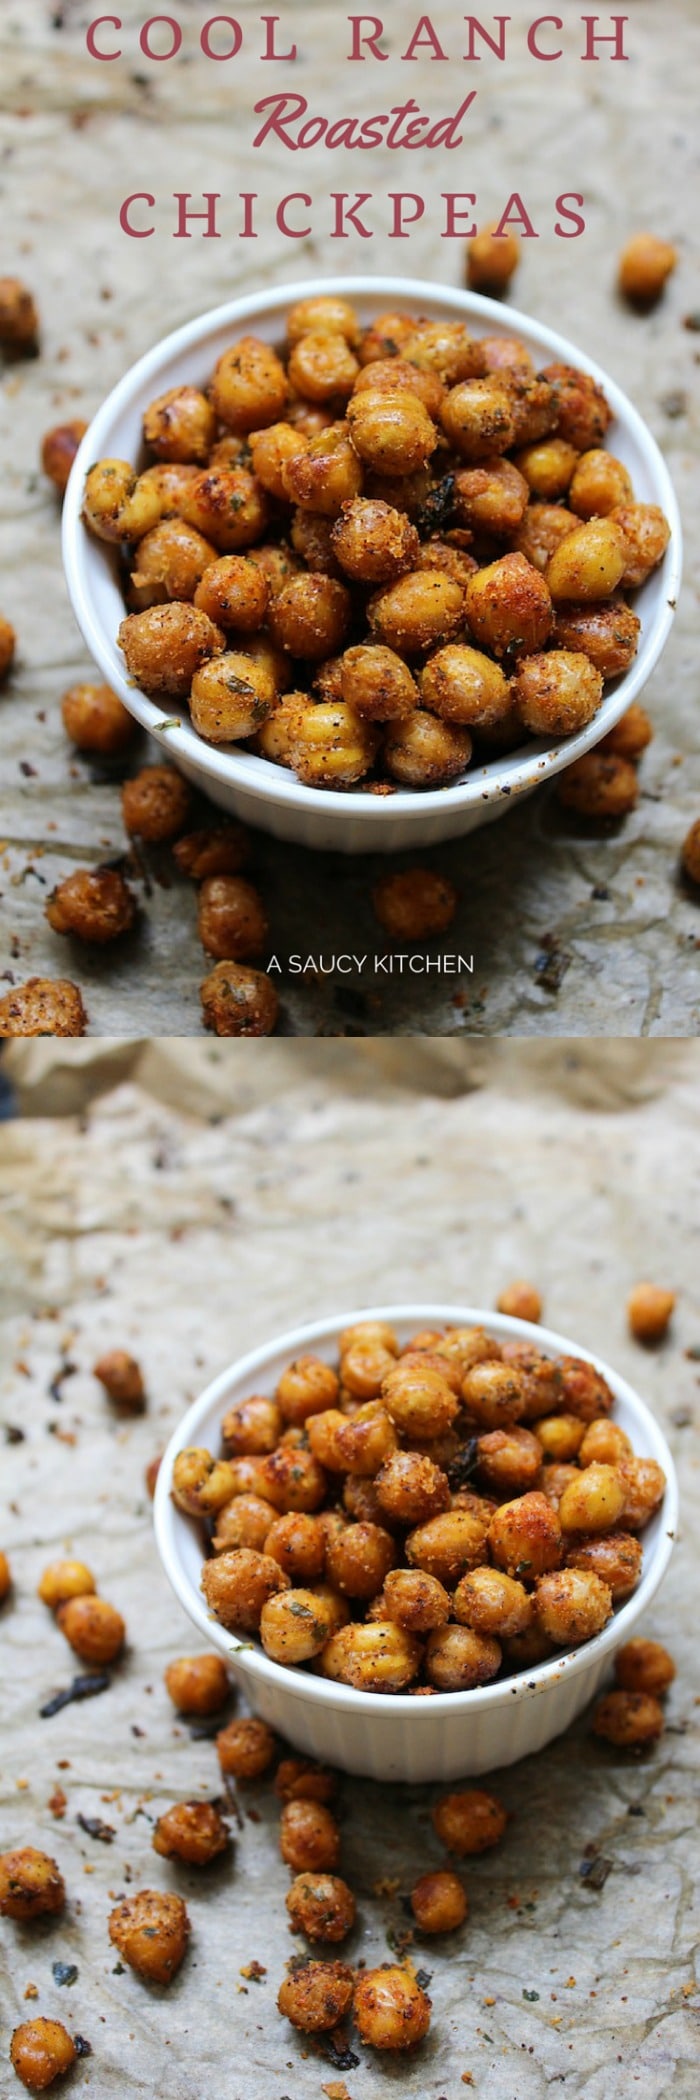 Vegan Cool Ranch Roasted Chickpeas - a super easy recipe for a healthy snack @asaucykitchen